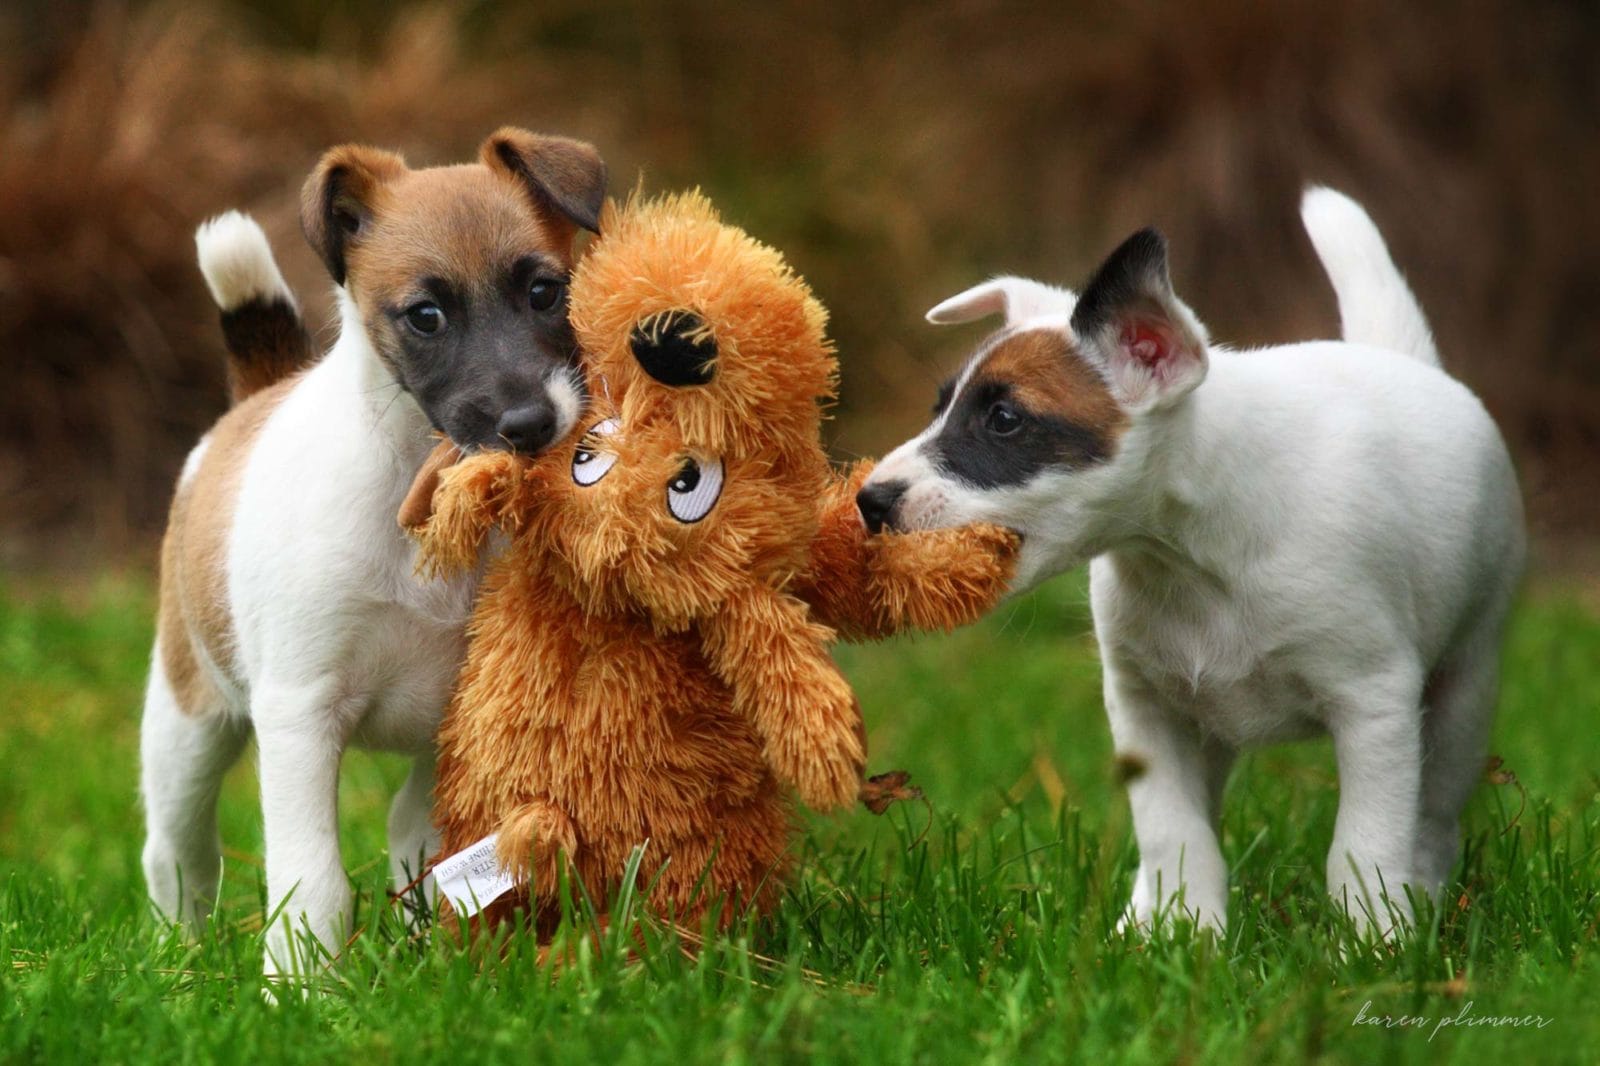 Bramble and Kiera- tan and white fox terrier puppies playing with dog toy